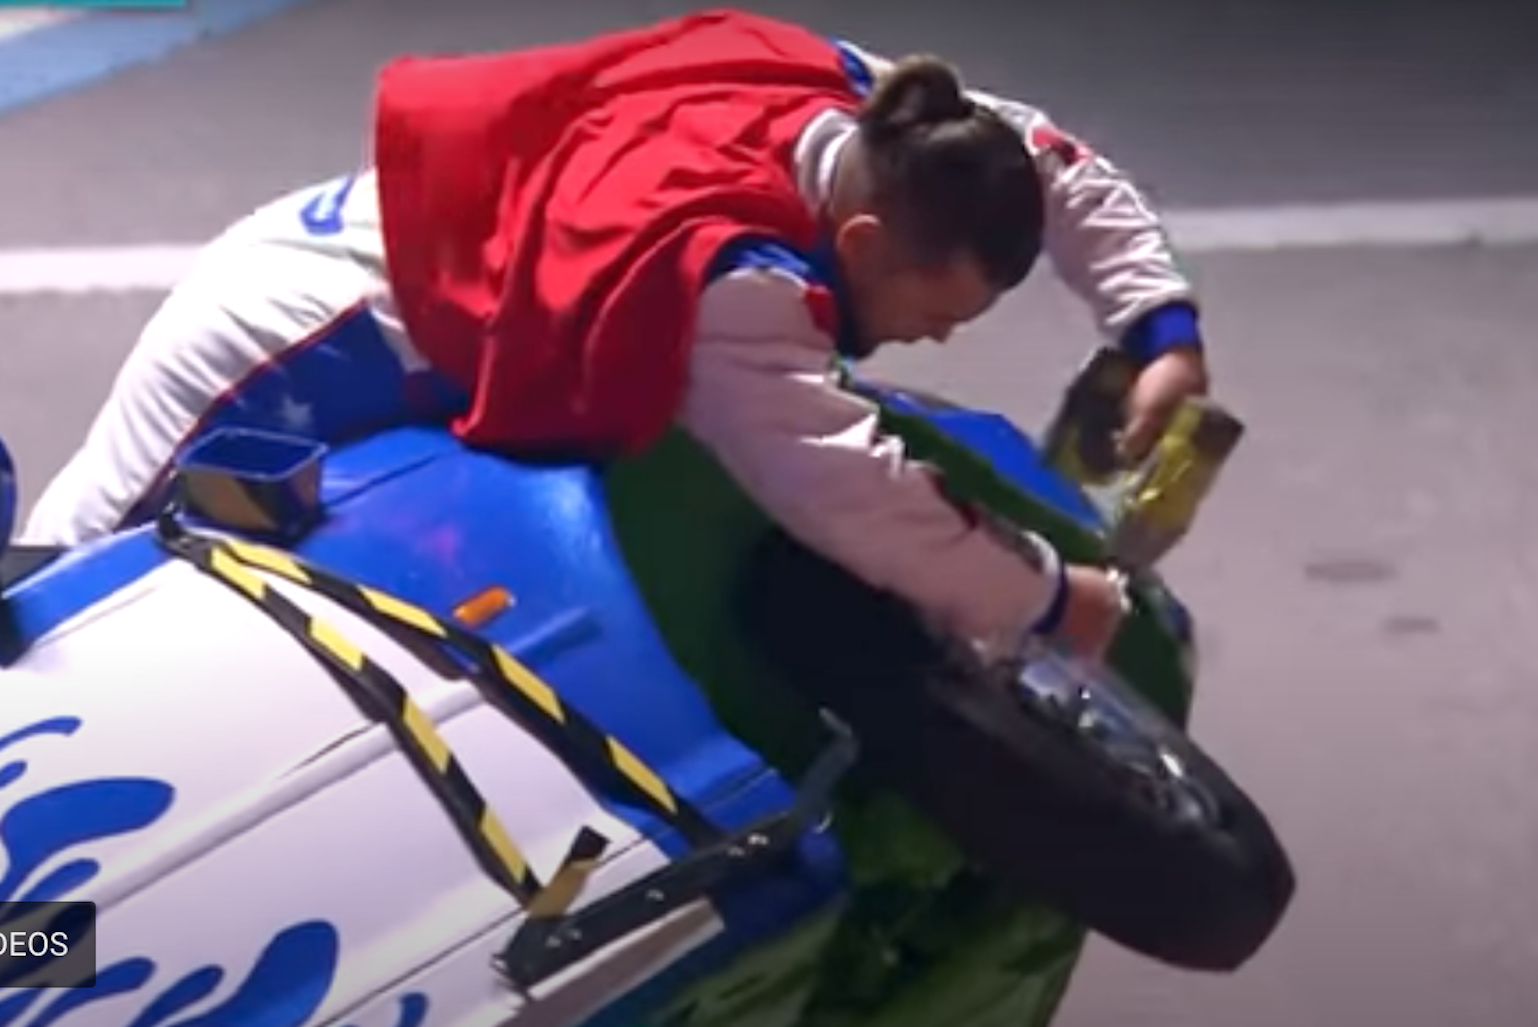 Fastest Tire Change On a Moving Car Record Just Broken